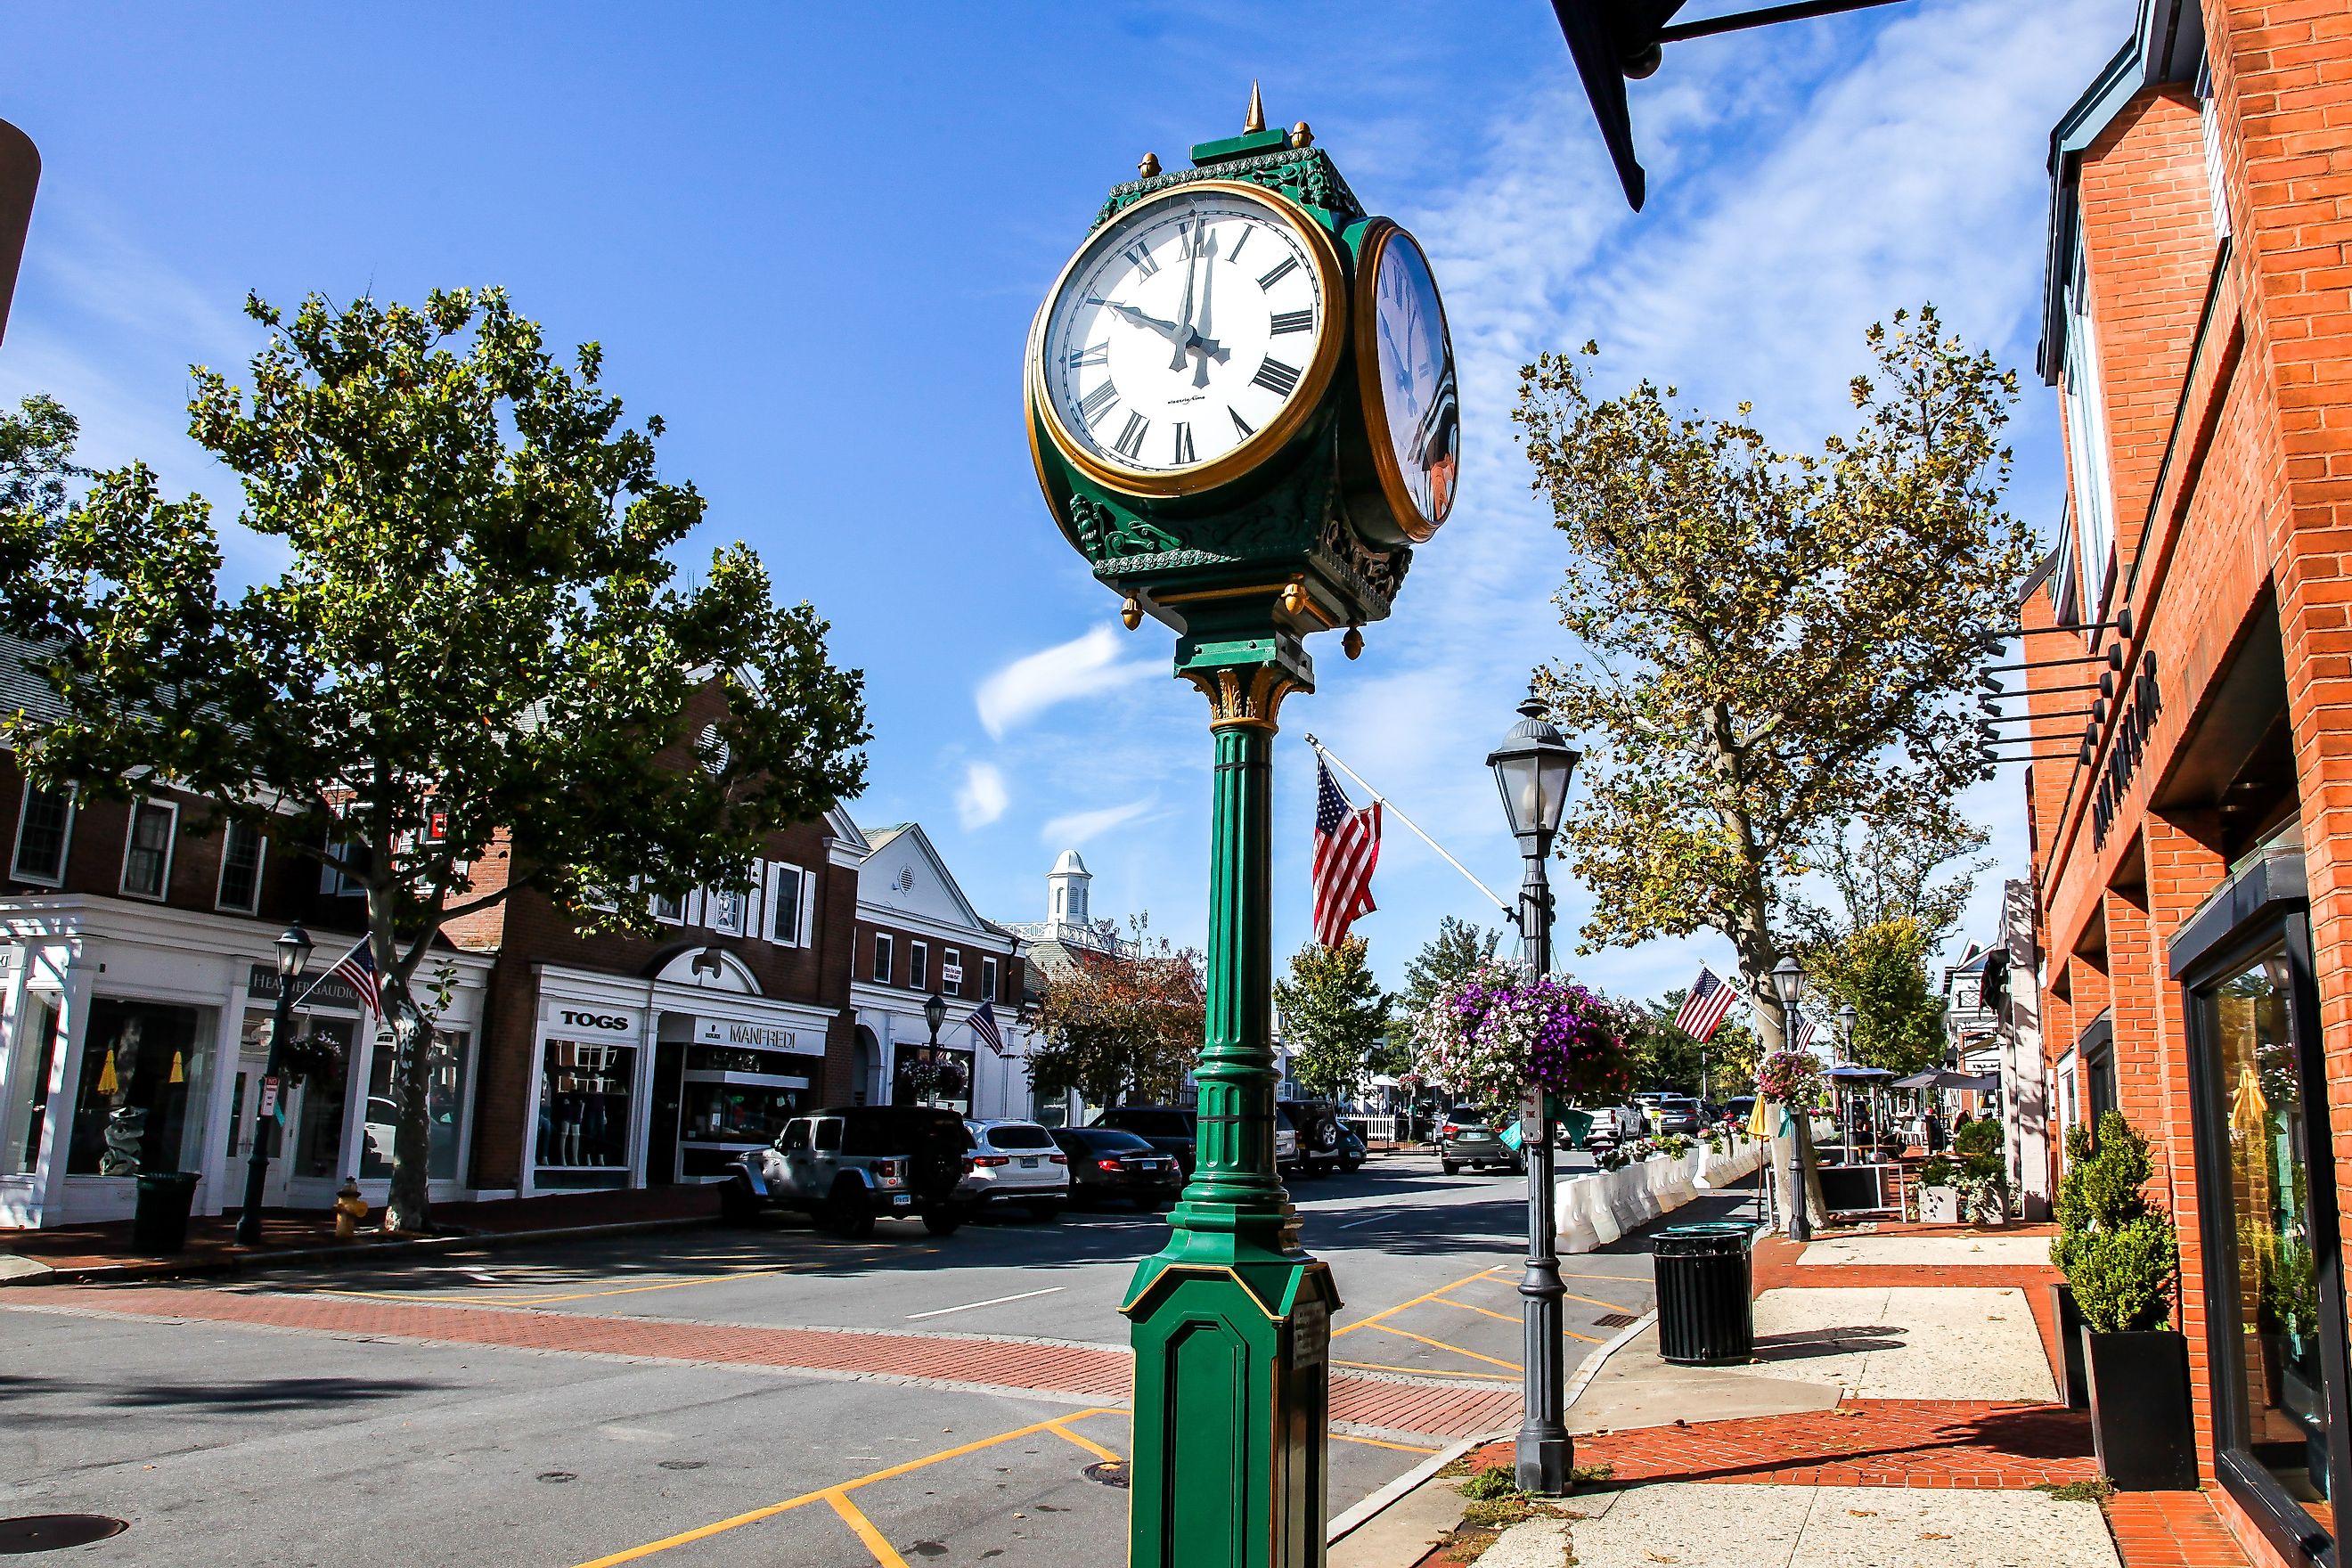 Downtown in nice day with clock, store fronts, restaurant and blue sky on Elm Street